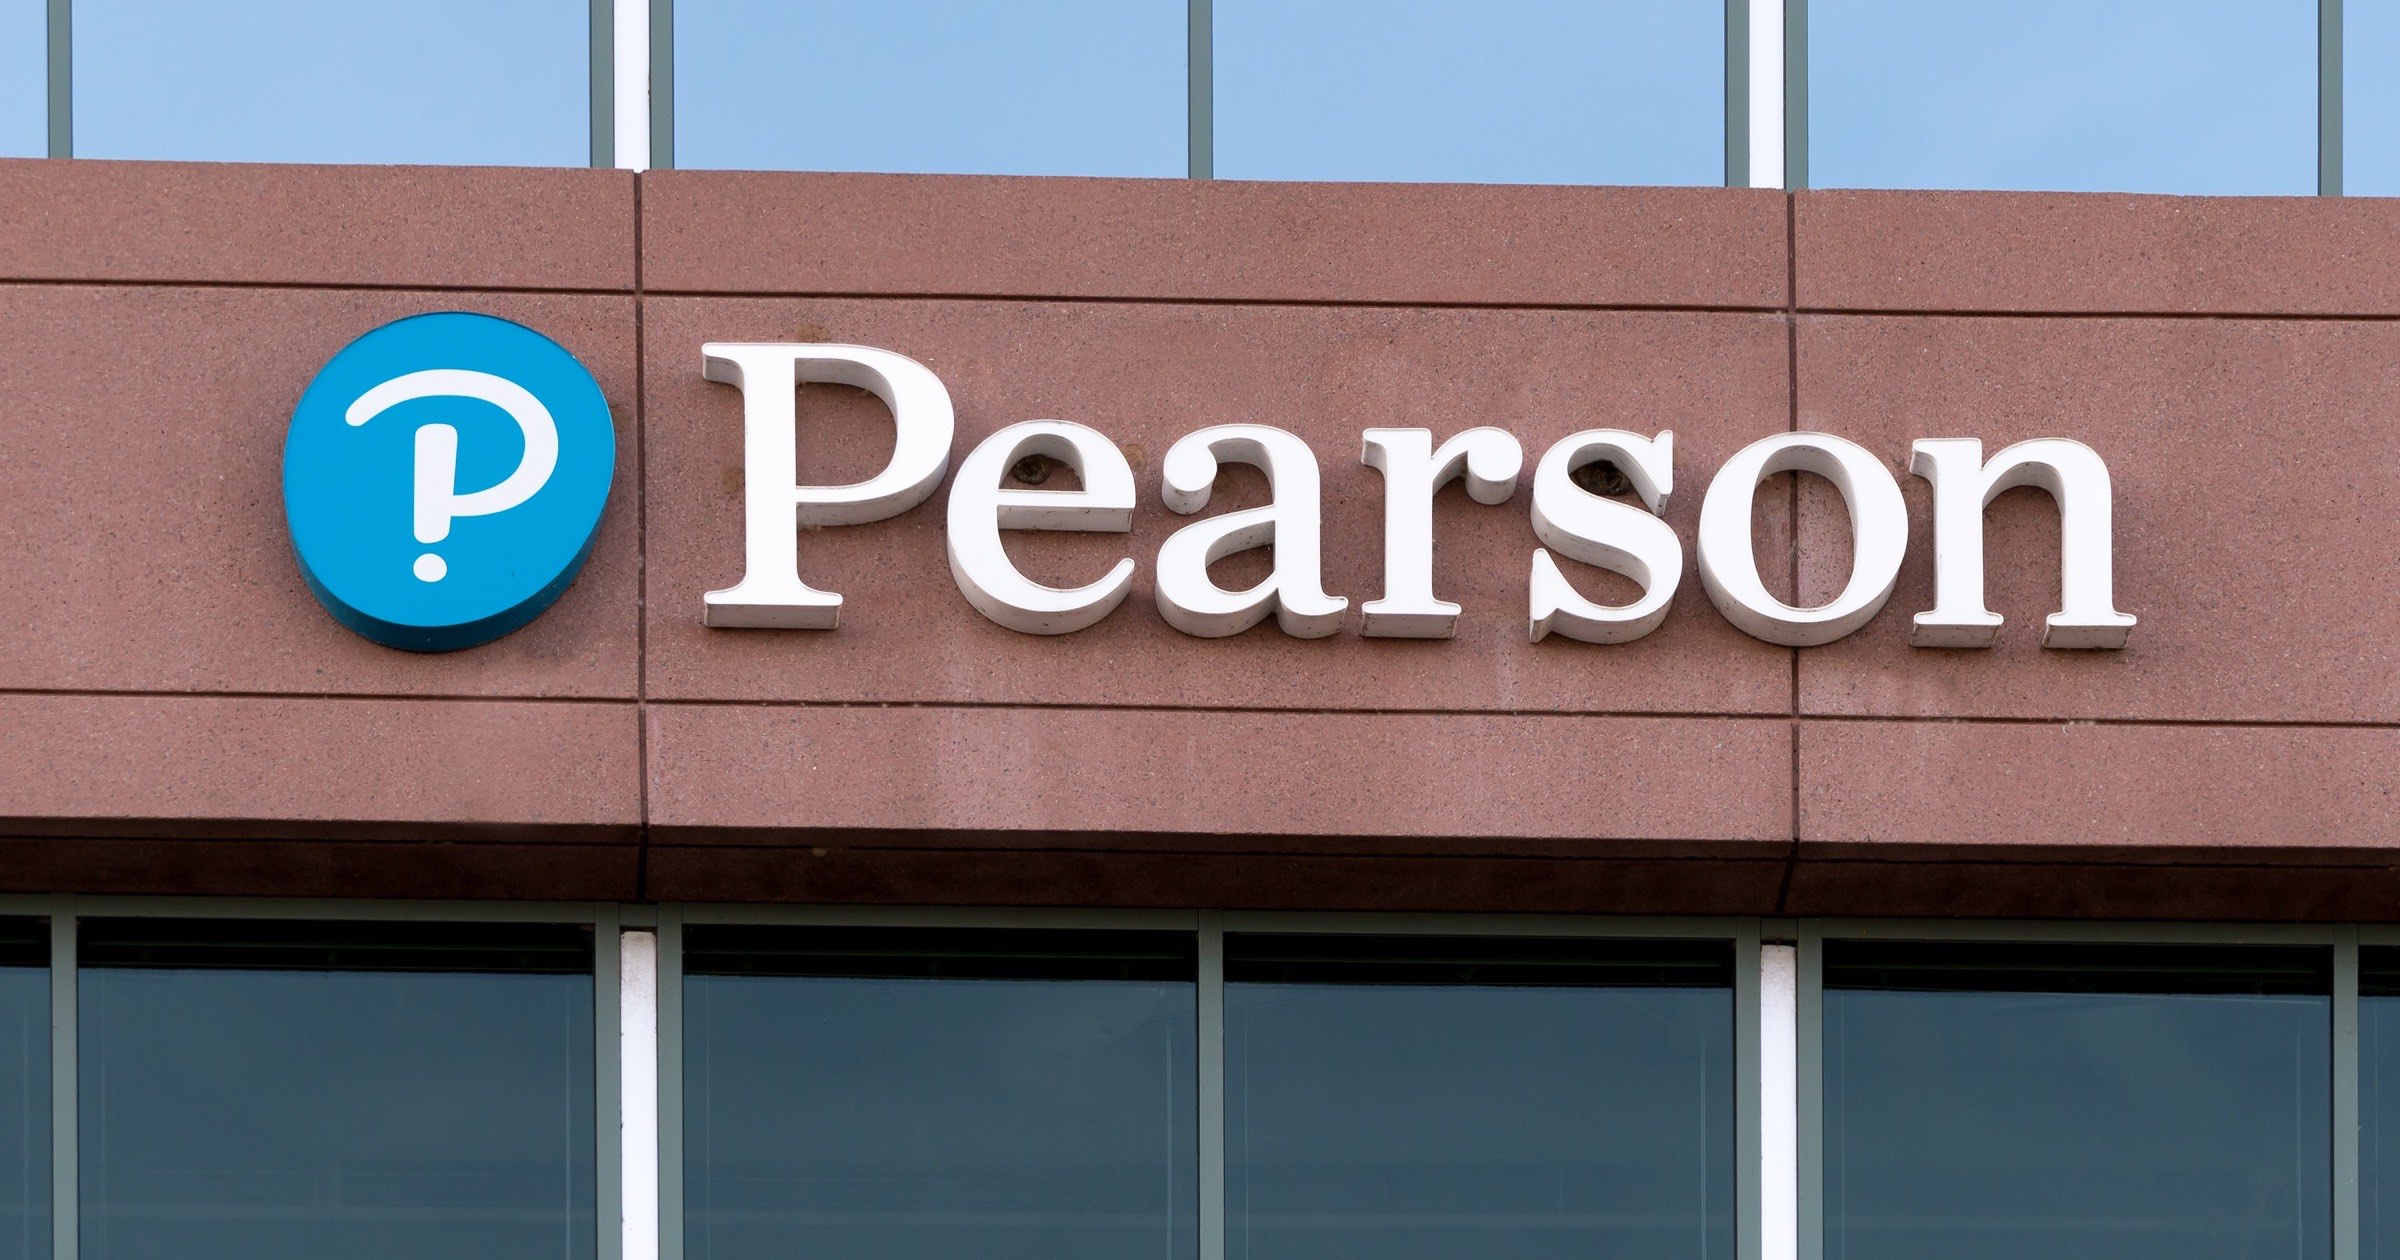 Pearson office building and logo